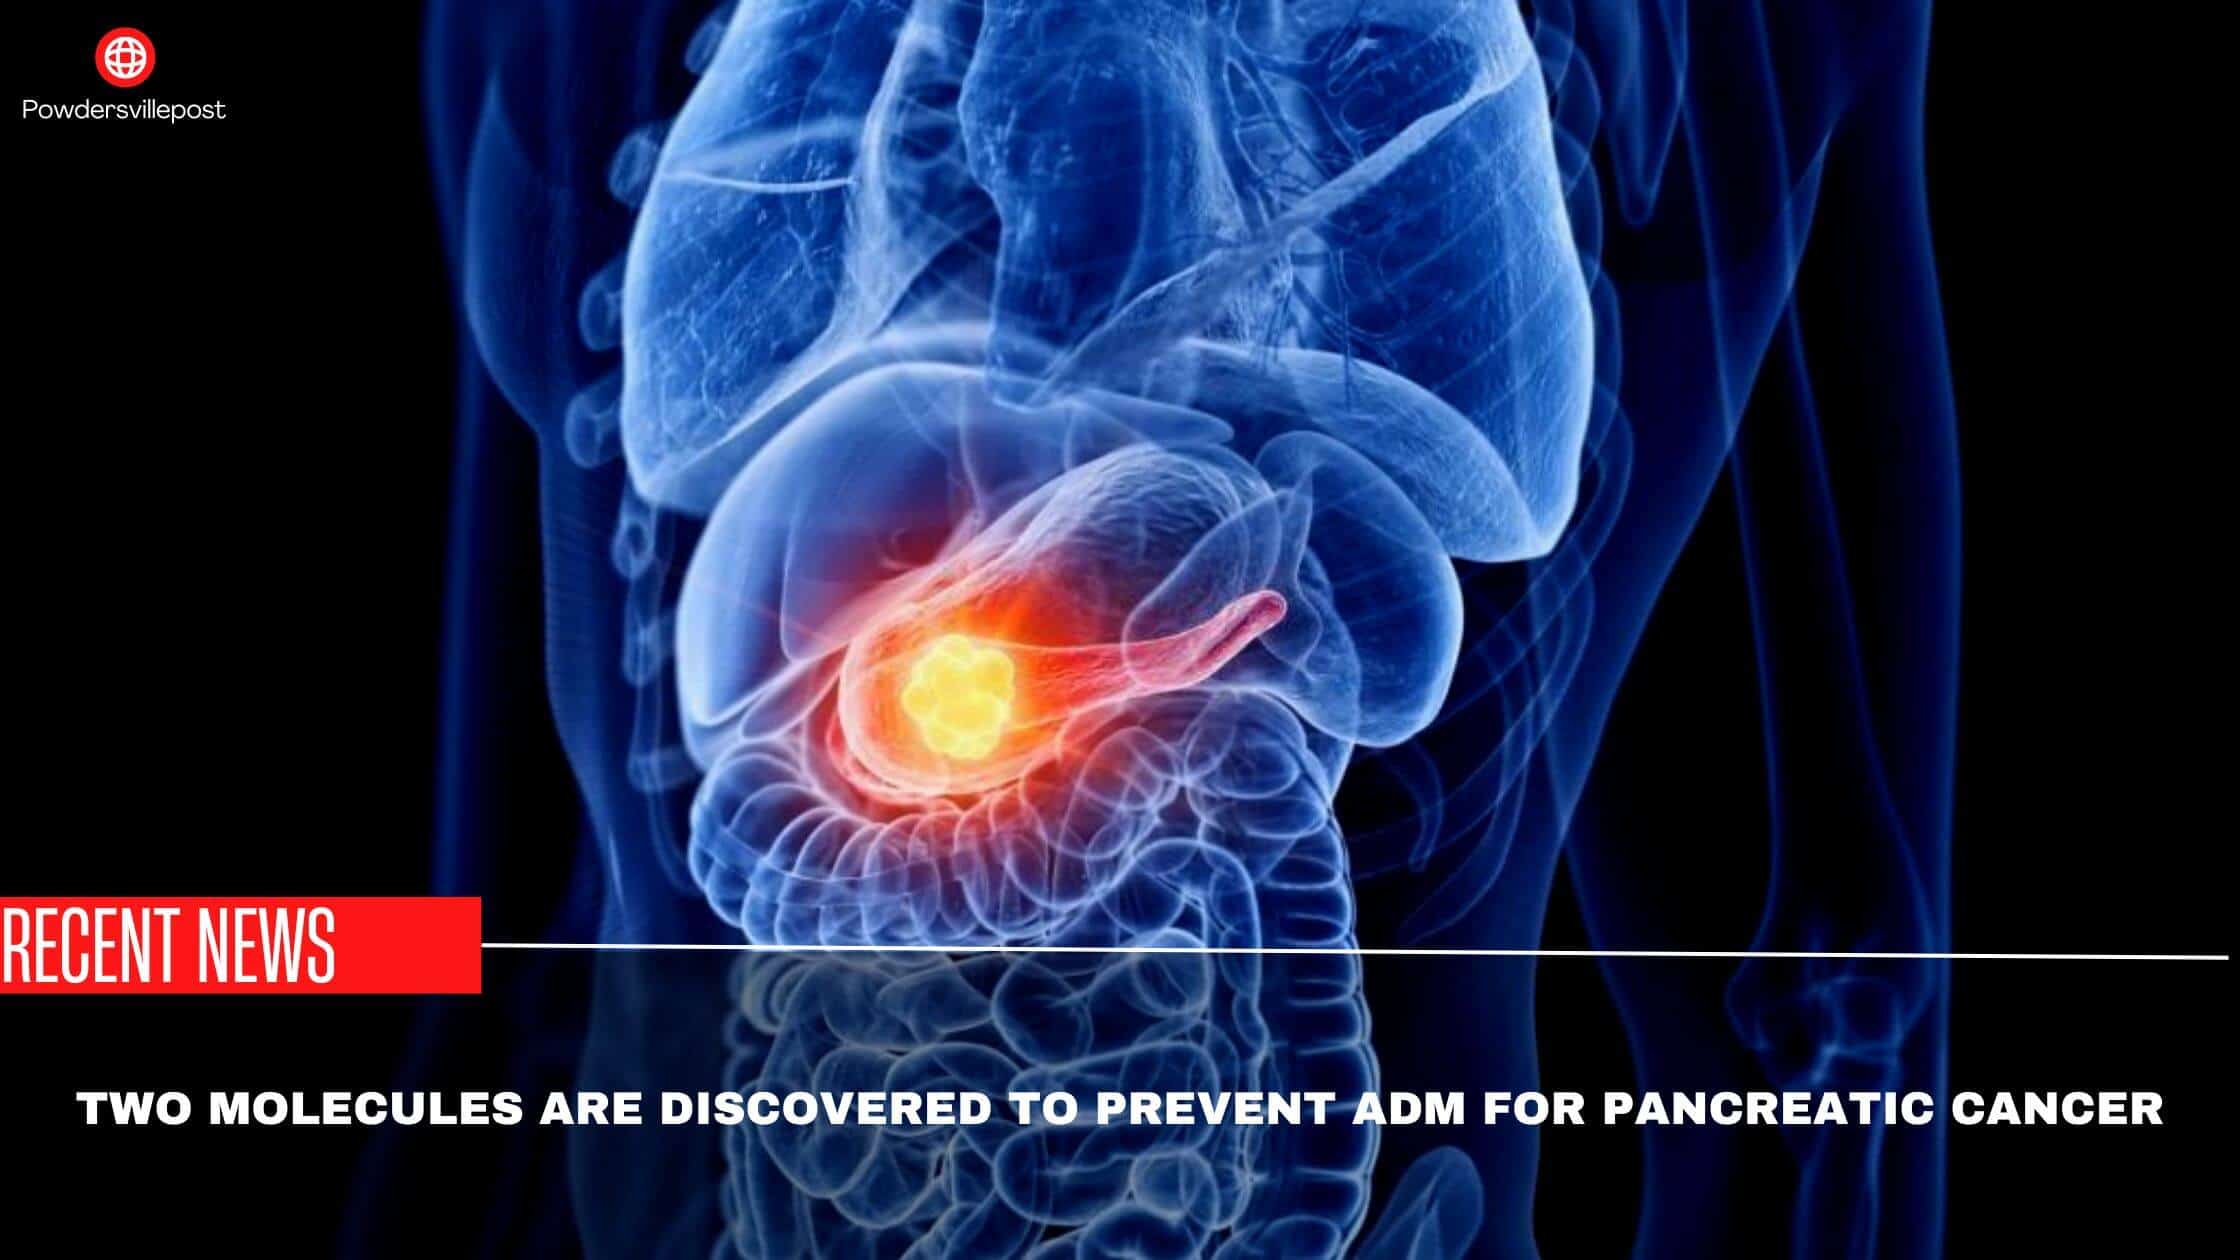 Two Molecules Are Discovered To Prevent ADM For Pancreatic Cancer